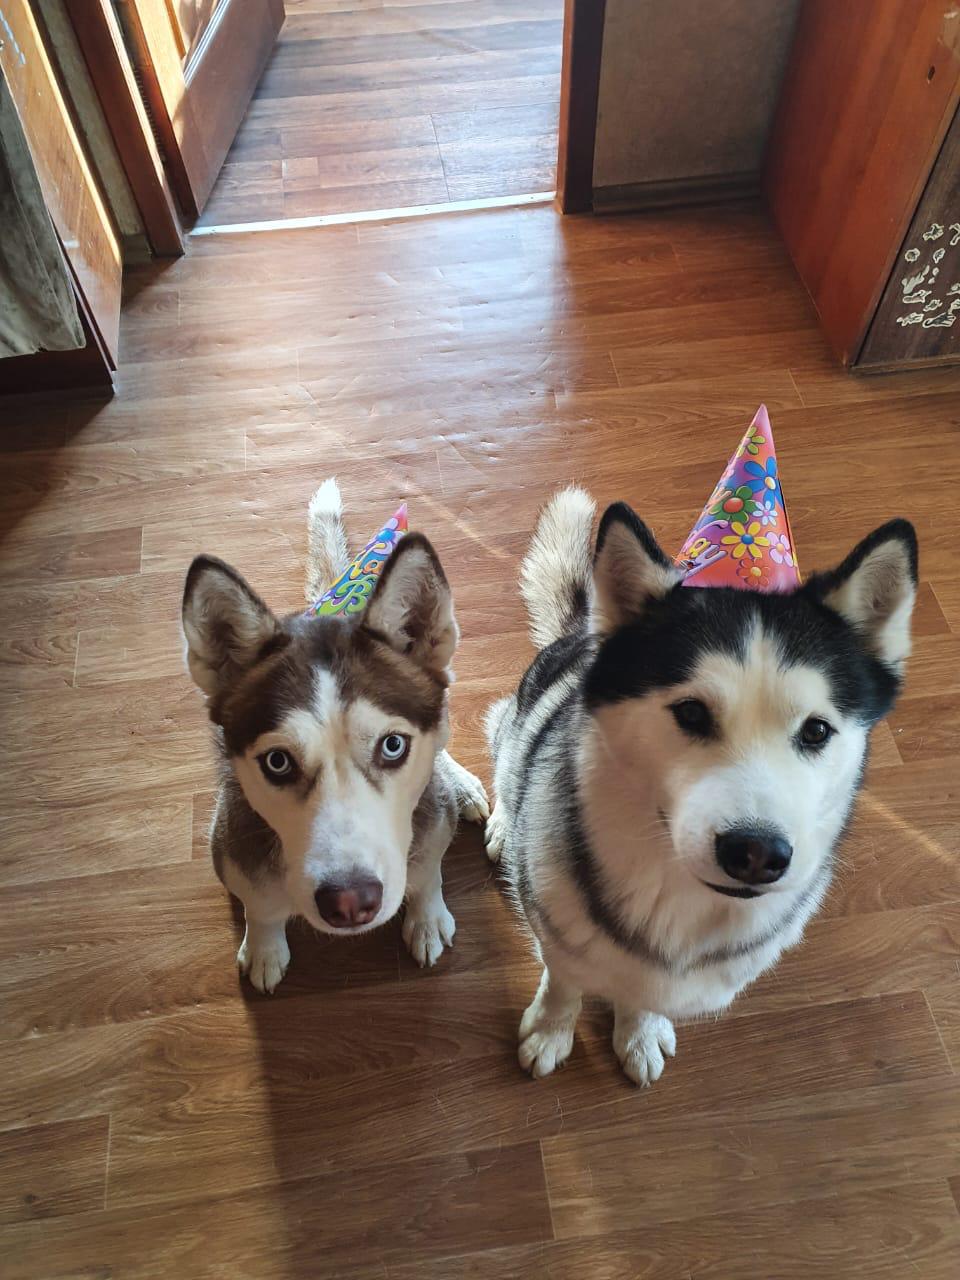 Husky dogs wearing party hats